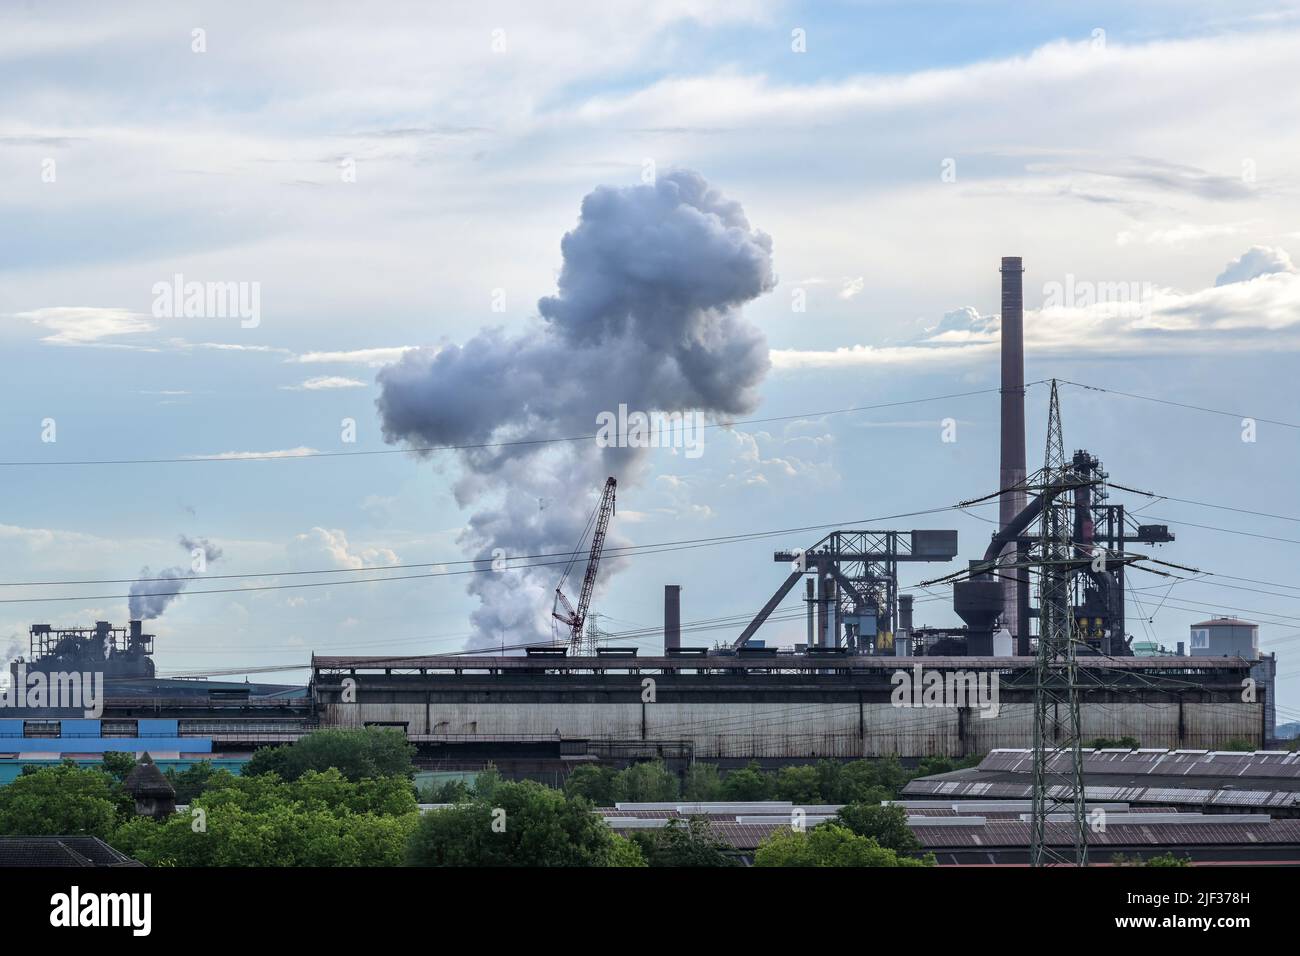 Duisburg, Germany, June 26, 2022: HKM, steelworks Krupp Mannesmann, pollution of heavy industry using fossil energy for steel production, coke oven an Stock Photo